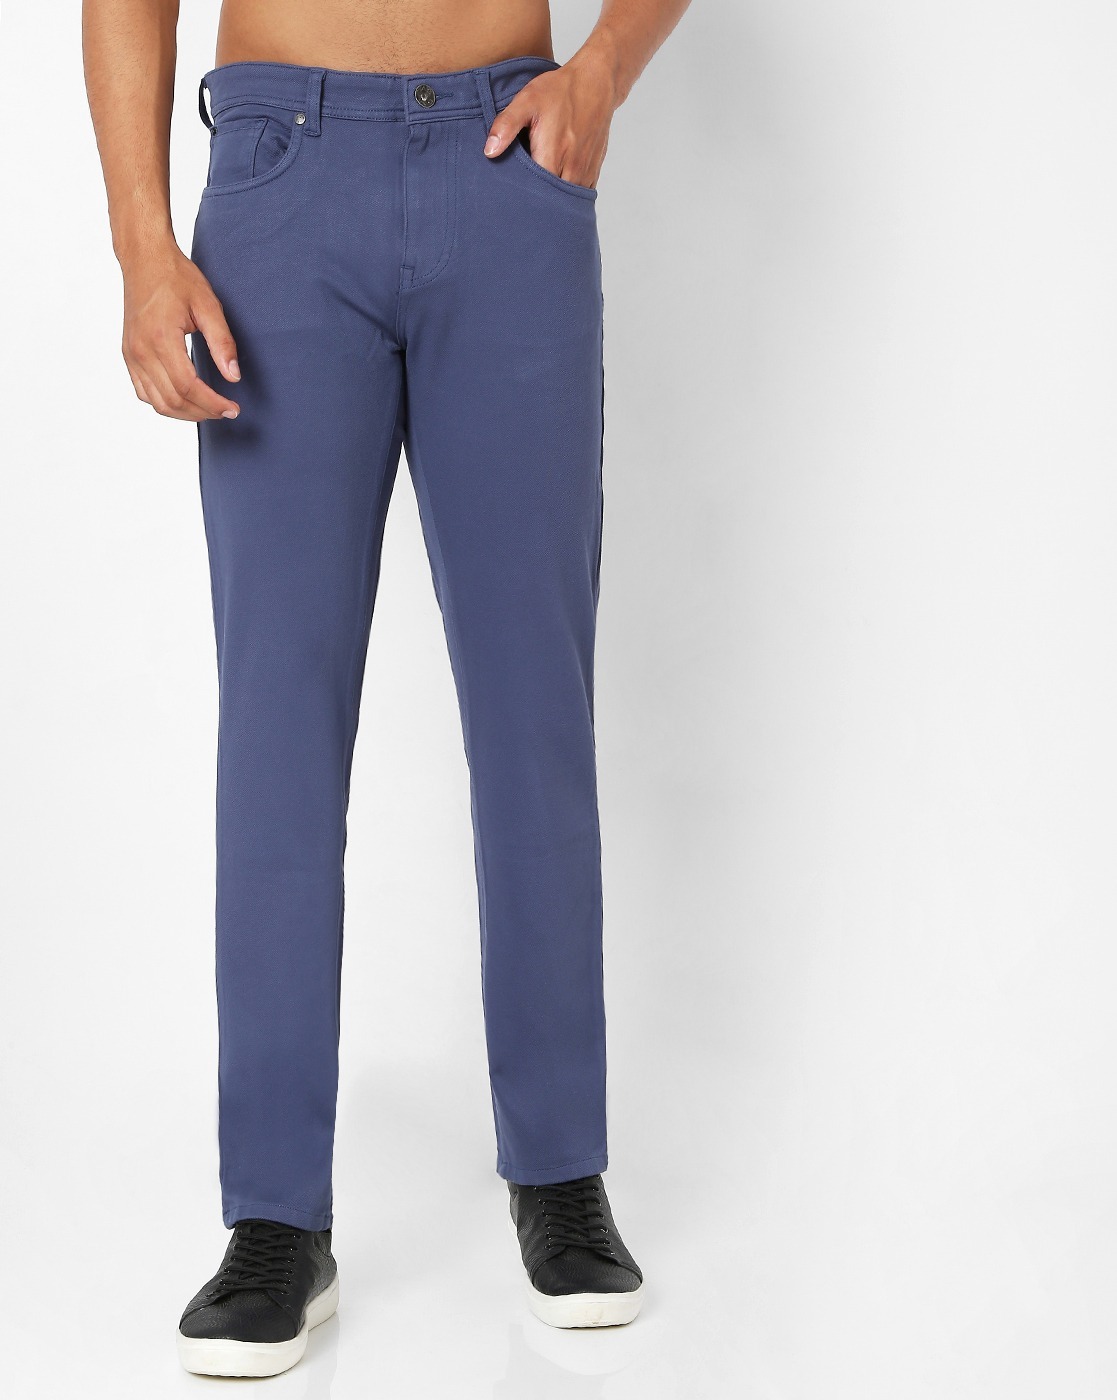 Buy Royal Blue Trousers & Pants for Men by GAS Online | Ajio.com